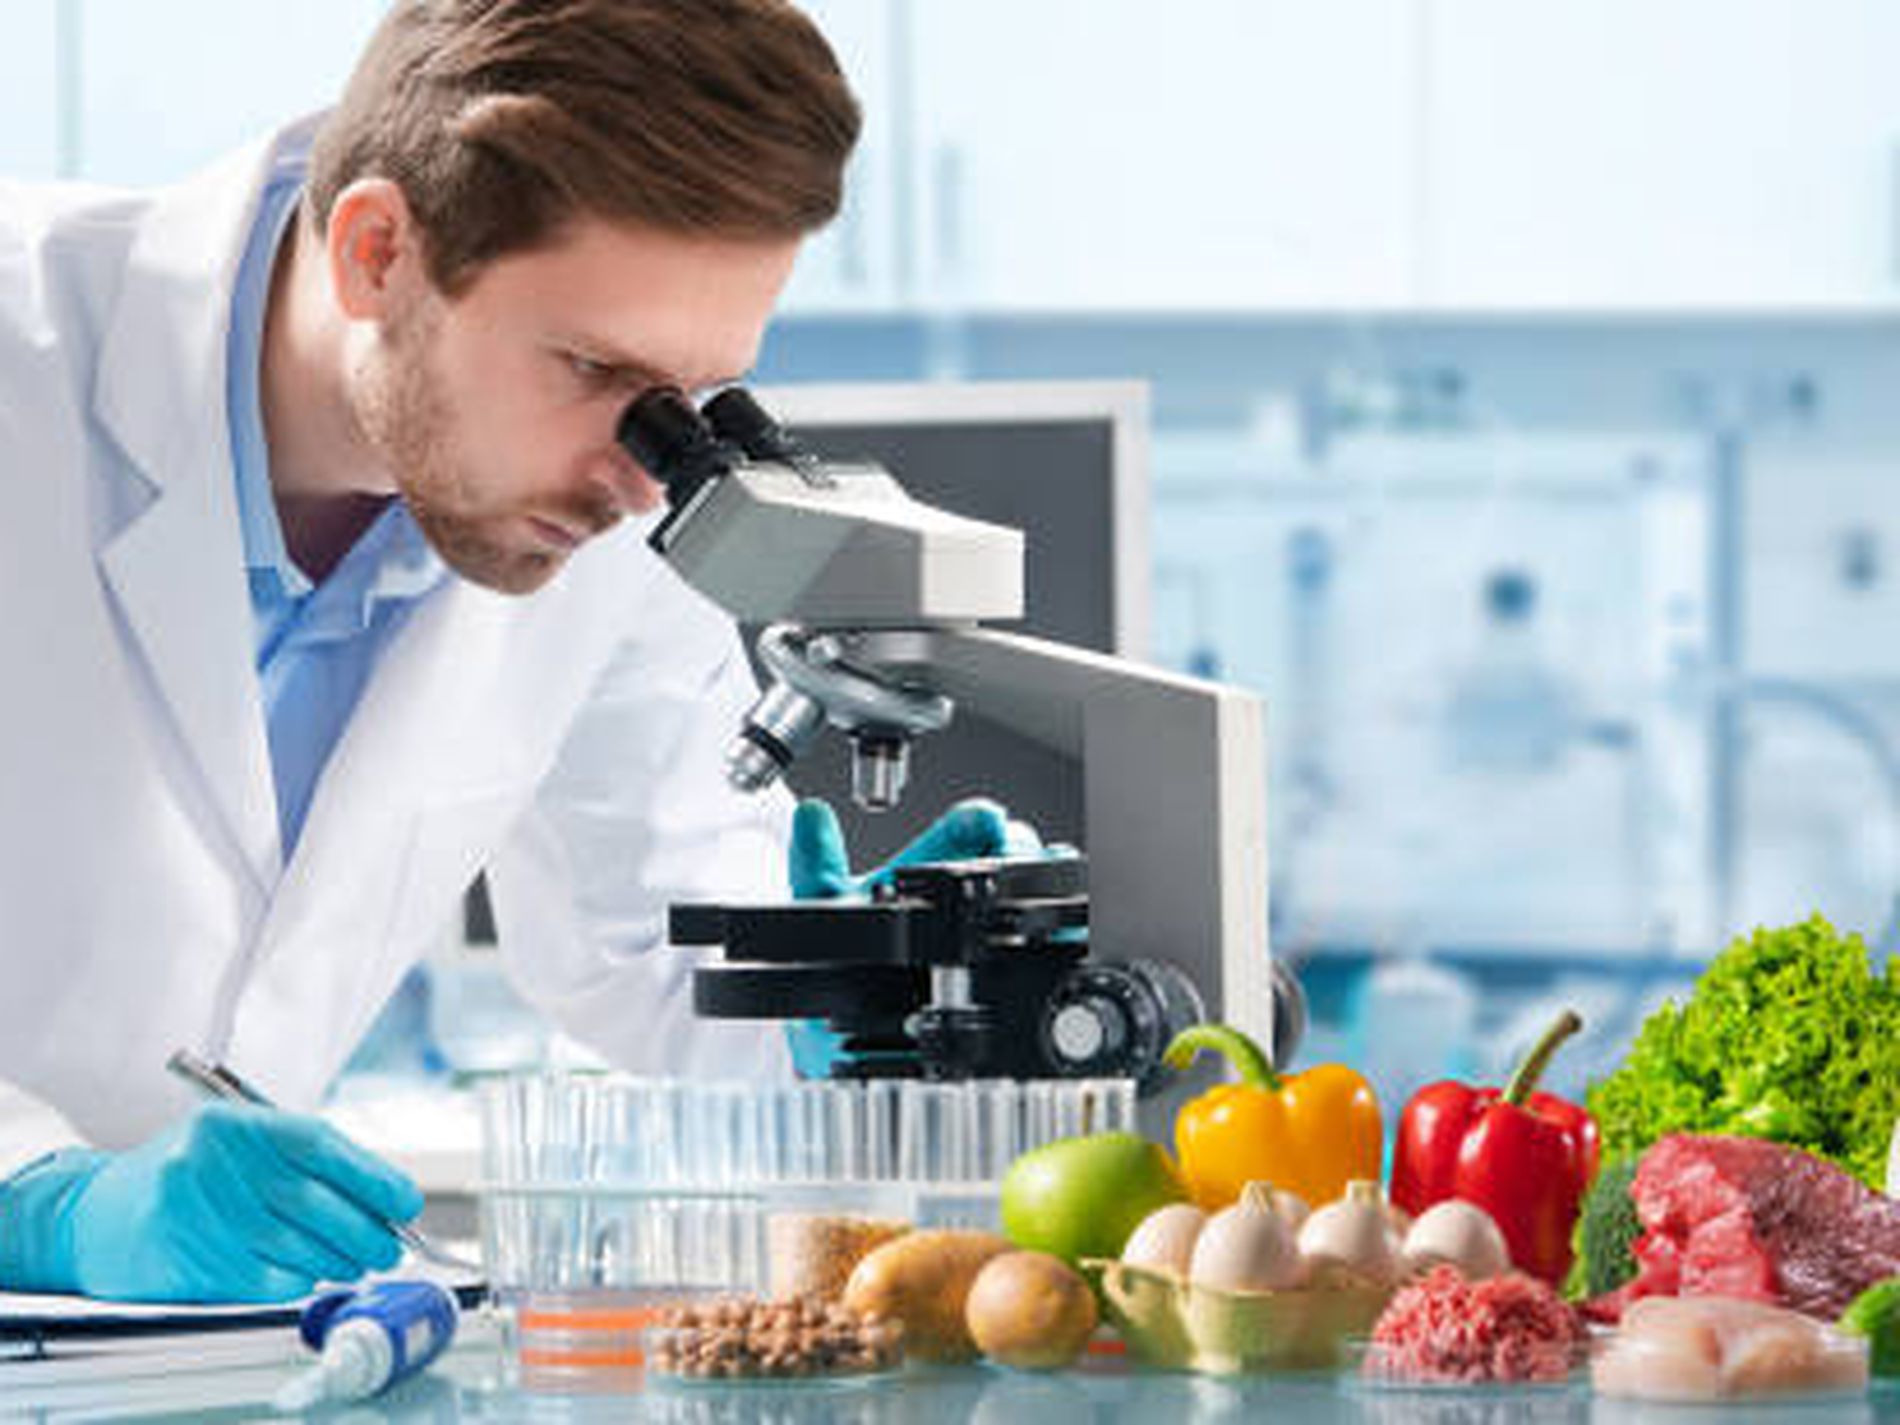 Food science and Technology consulting Business For Sale